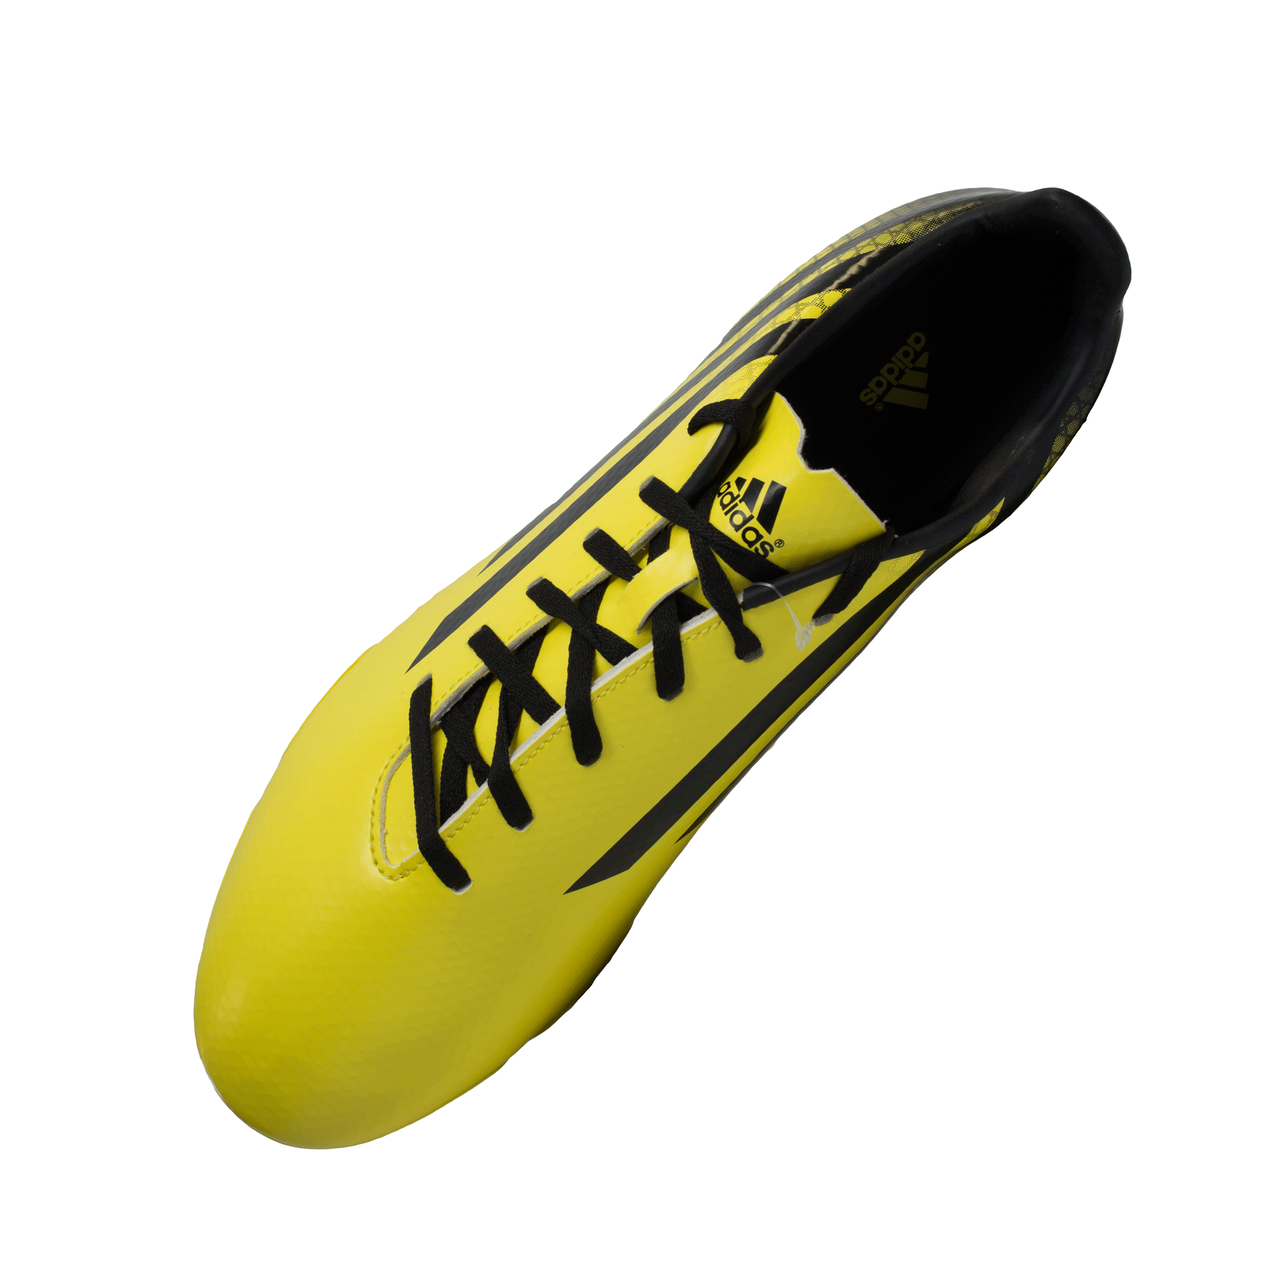 Adidas Crazy Quick Malice SG (ELECTRIC YELLOW/CORE BLACK) on sale 